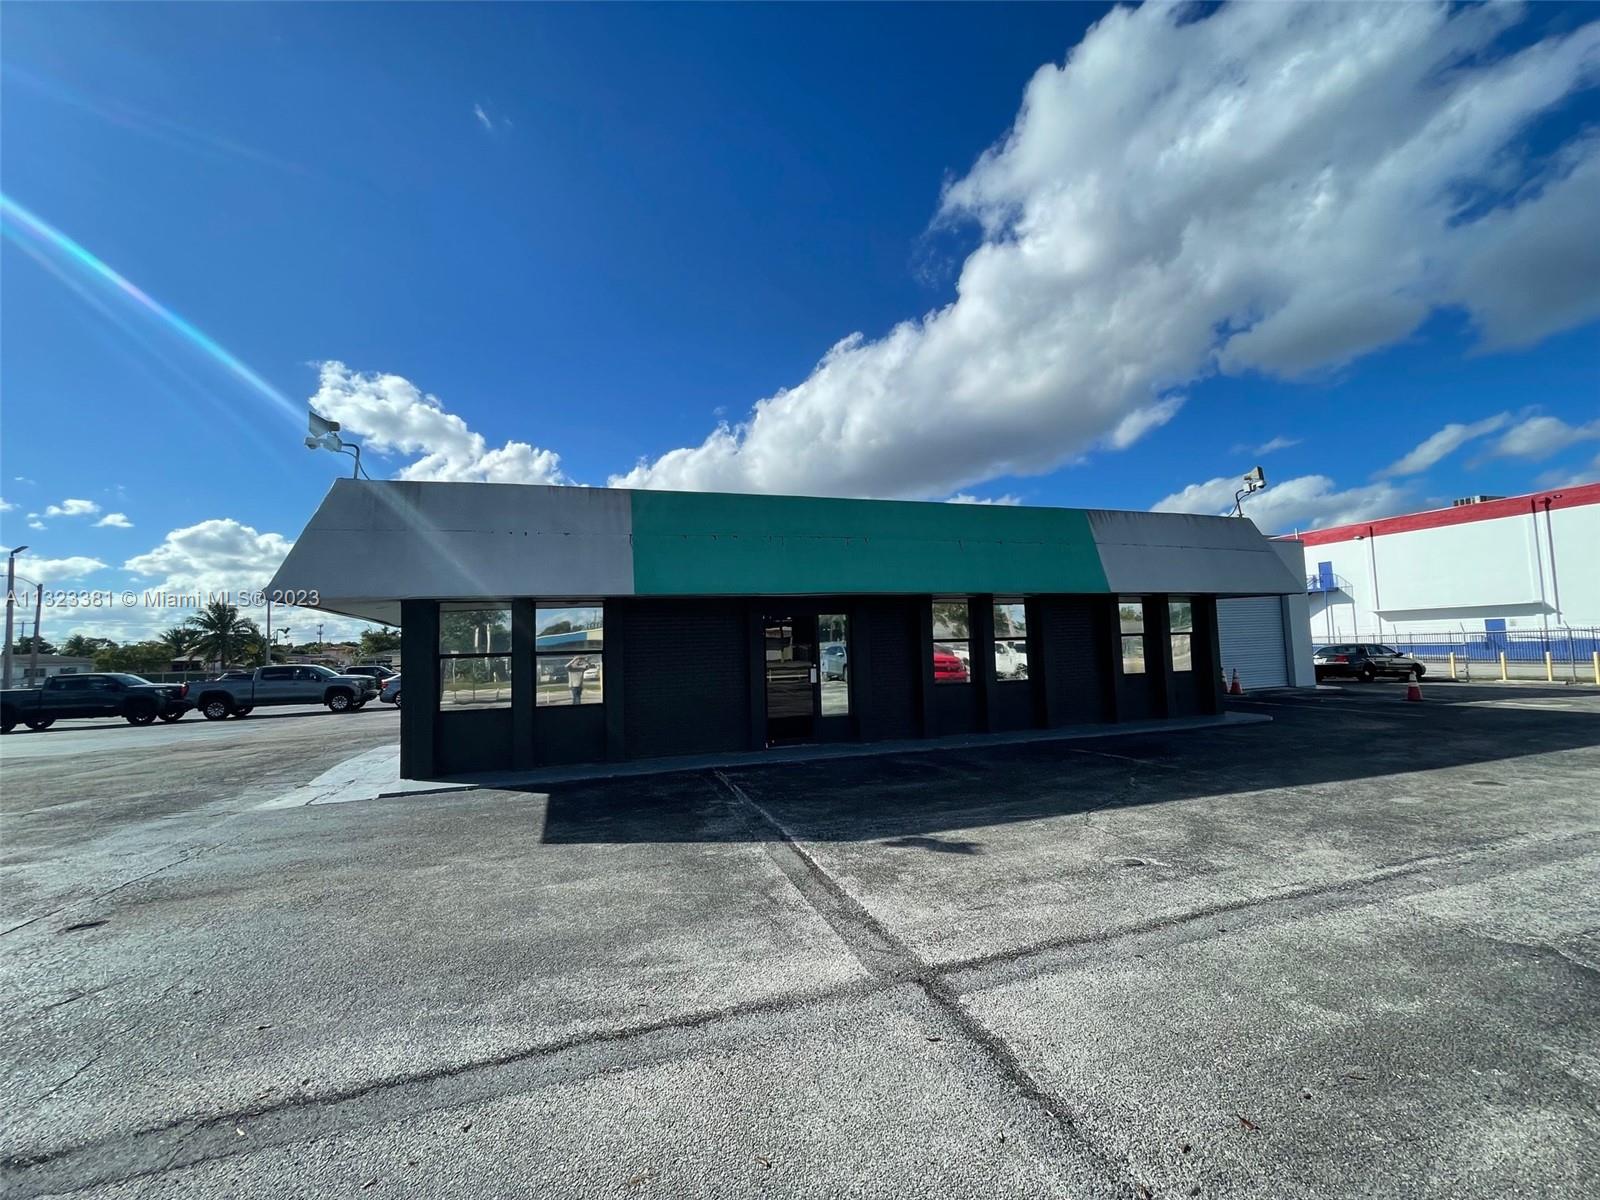 LOCATED RIGHT OFF I-95 AMAZING OPPORTUNITY TO LEASE 1.258 ACRES OF AUTO AND INDUSTRIAL USE! FULLY GATED AND READY TO BE TRANSFORMED INTO AN EXOTIC CAR RENTAL, DEALERSHIP, ETC... CALL LISTING AGENT FOR APPOINTMENT!